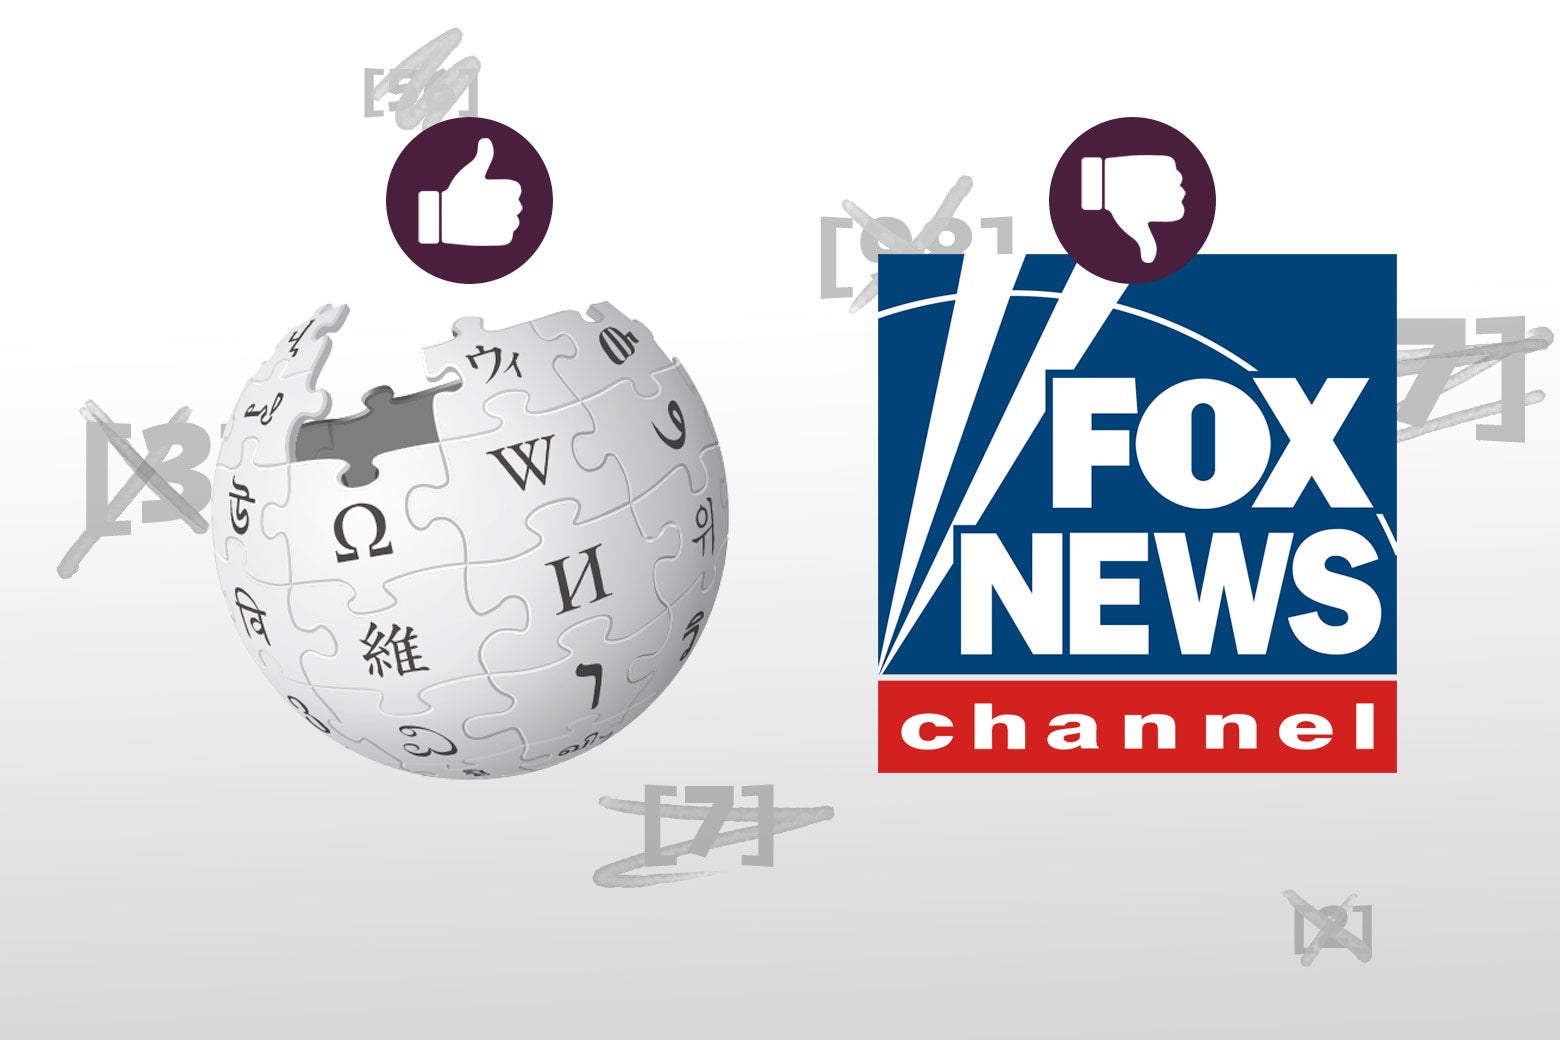 The Wikipedia logo, with a thumbs up, next to the Fox News logo, with a thumbs down.